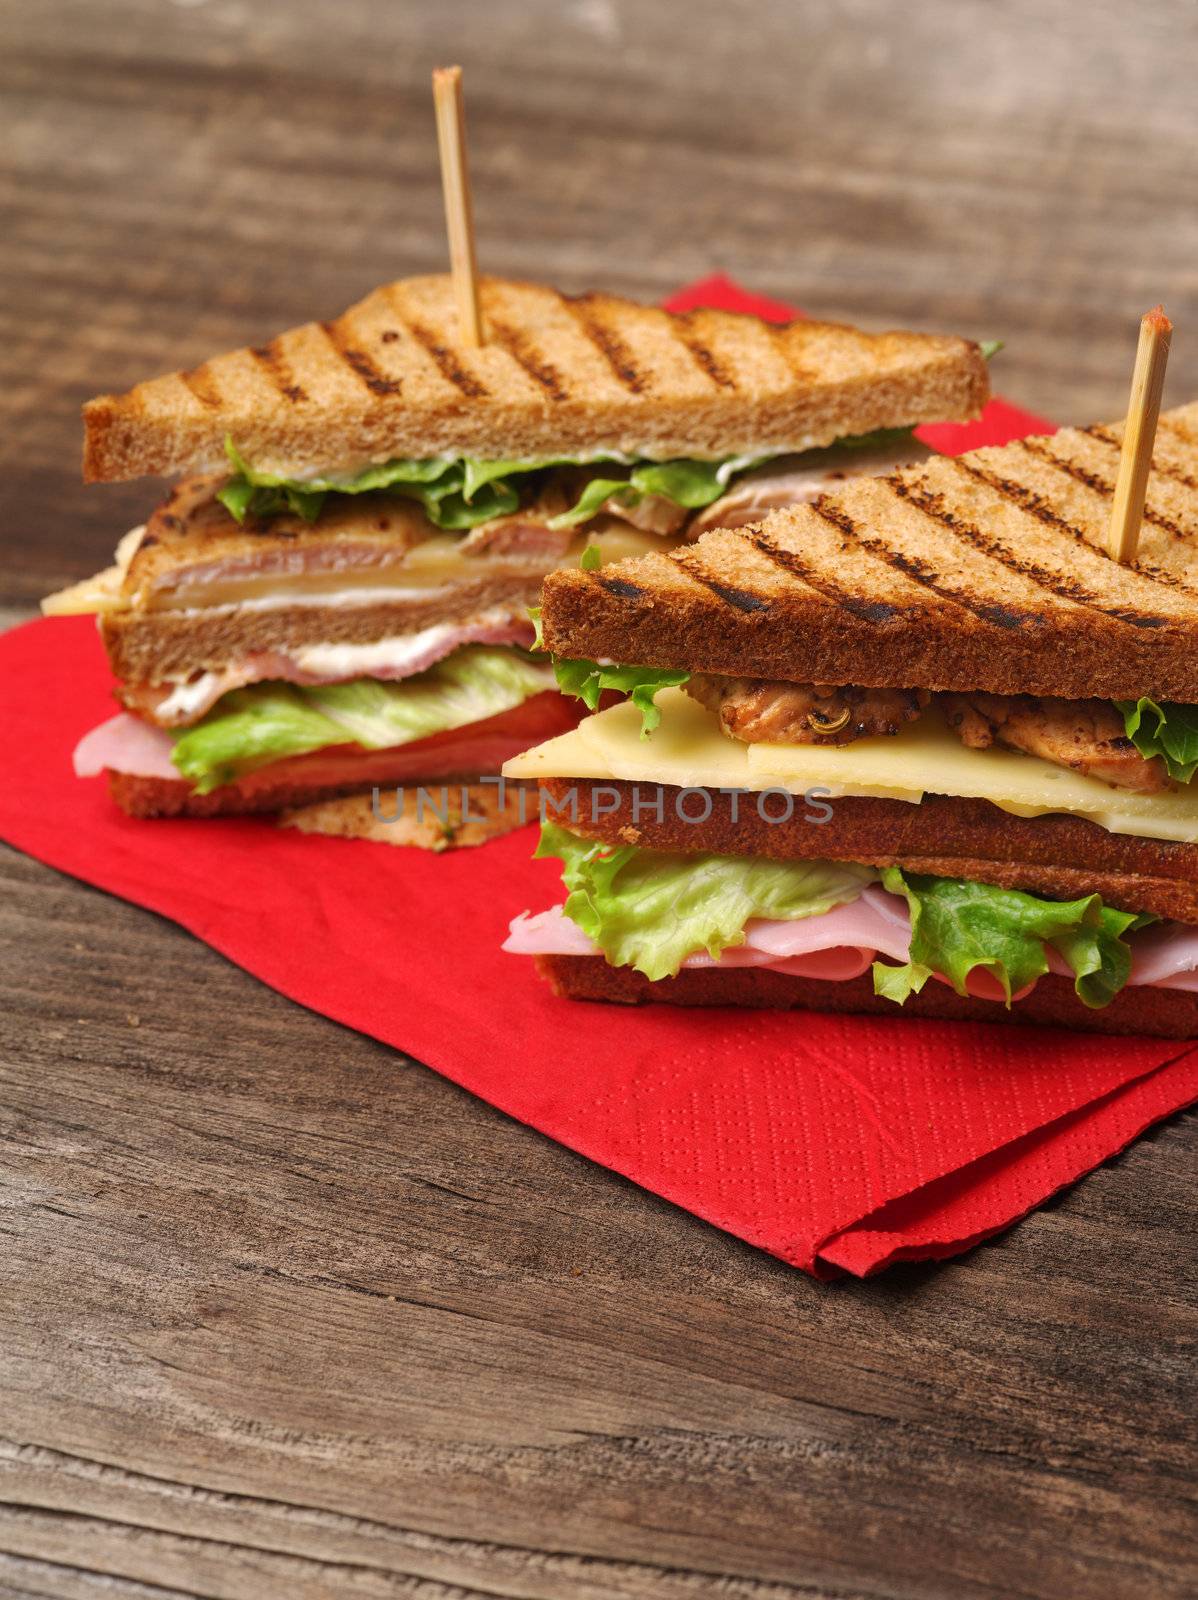 Photo of a club sandwich made with turkey, bacon, ham, tomato, cheese, lettuce on a red napkin and old wood picnic table.